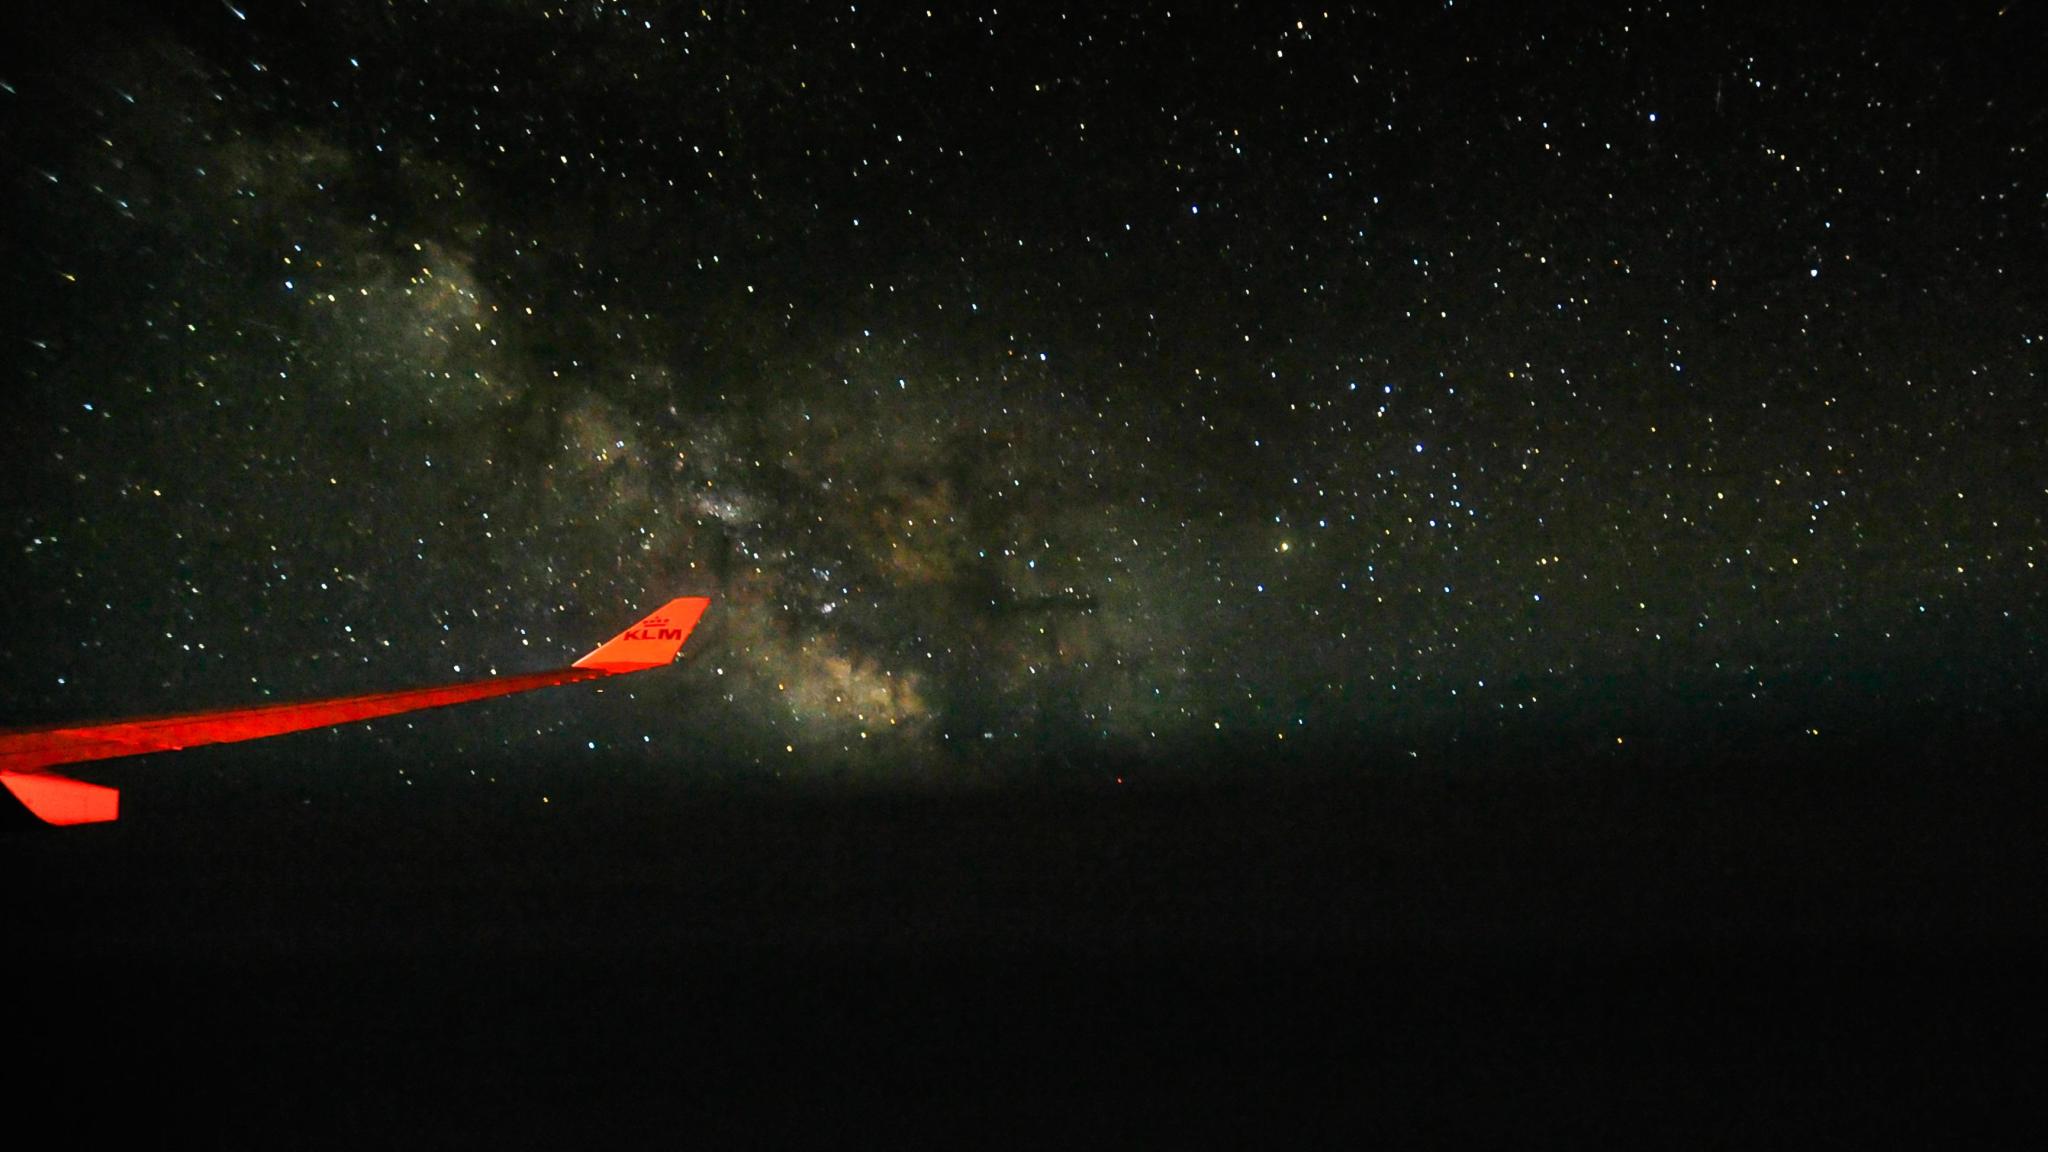 On more View of Milky Way Shot from a Moving Airplane, this time over Iceland